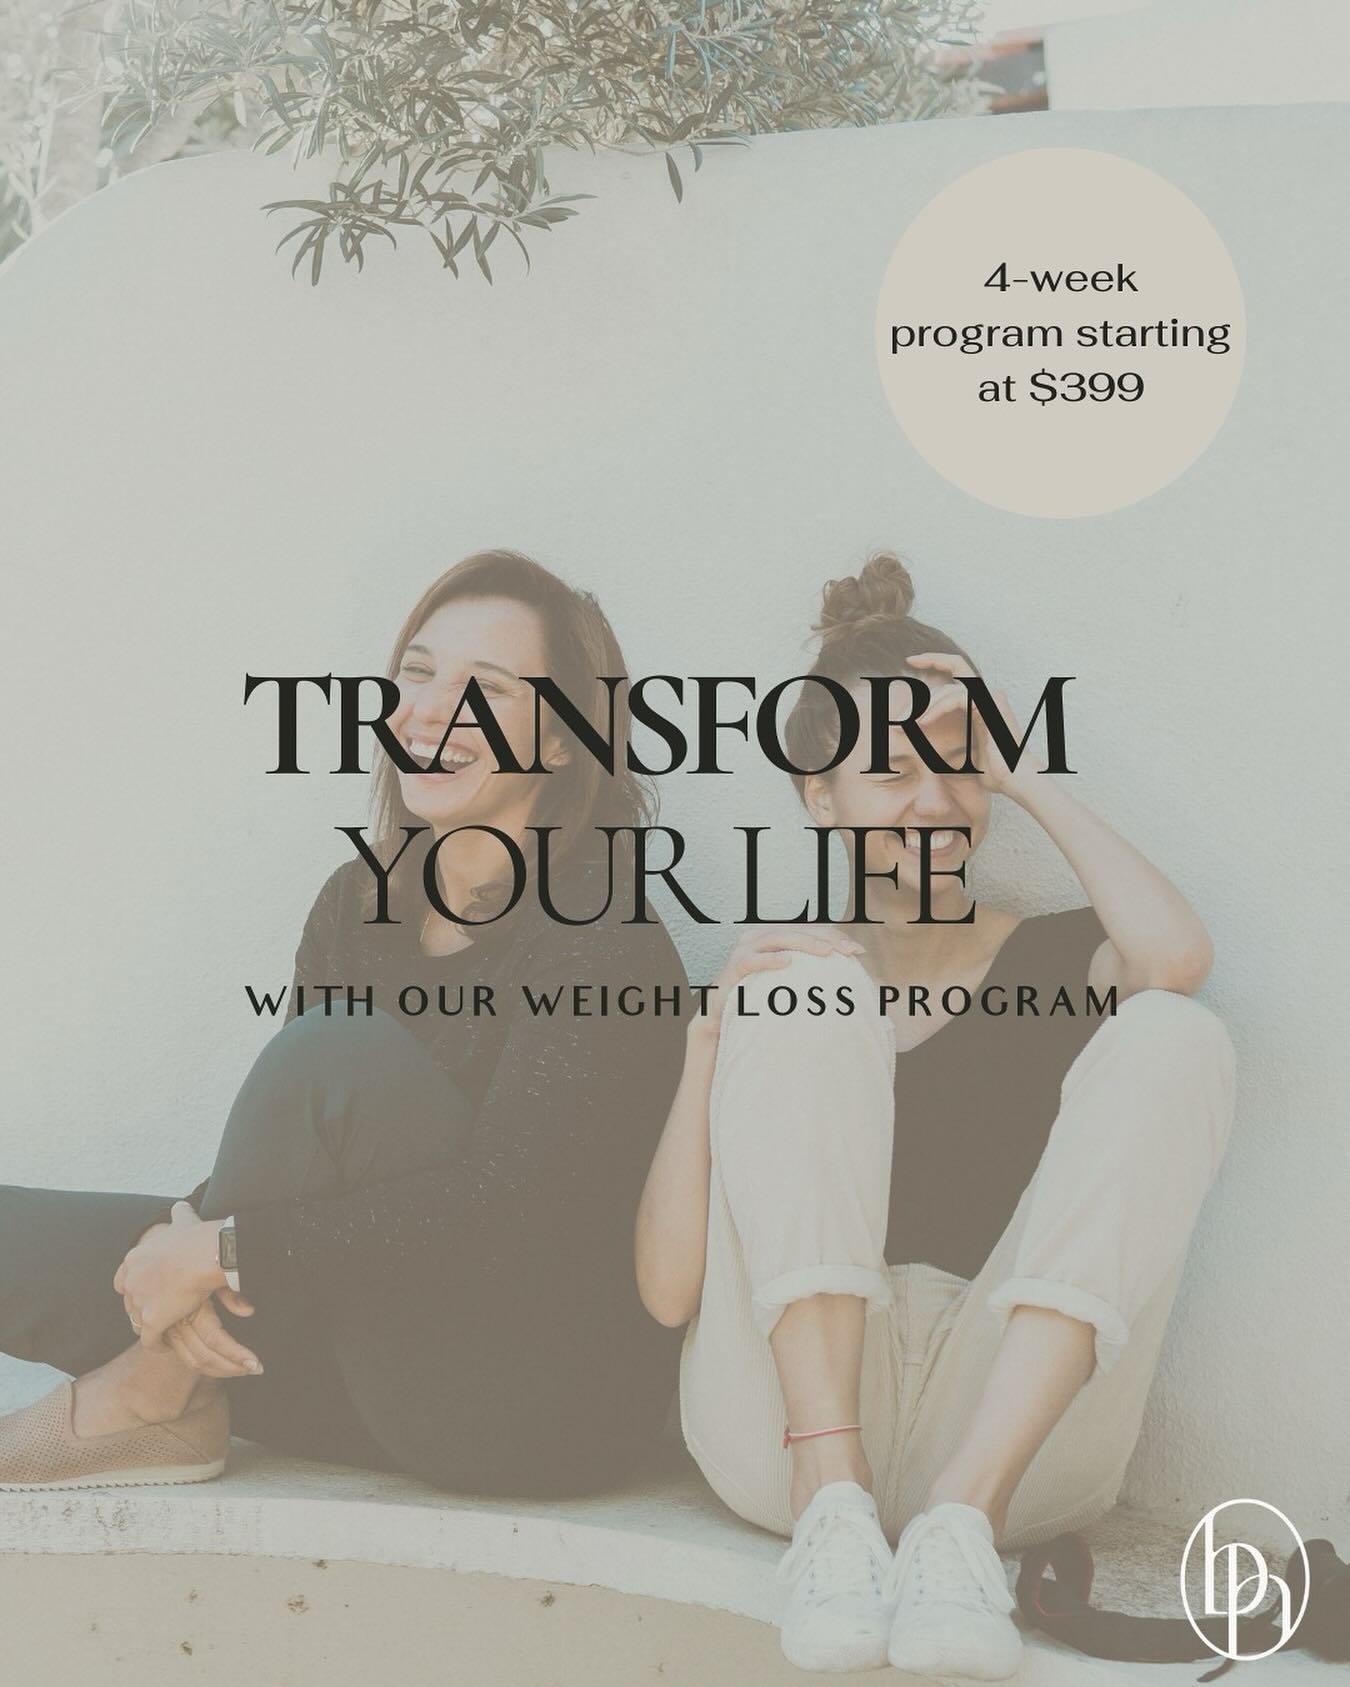 Struggling with weight loss? Discover our once-a-week injection for amazing results. Join thousands who've found success with minimal side effects. 💉

Give us a call at (863) 225-1244

Send us a message if you have any questions!
We also offer onlin